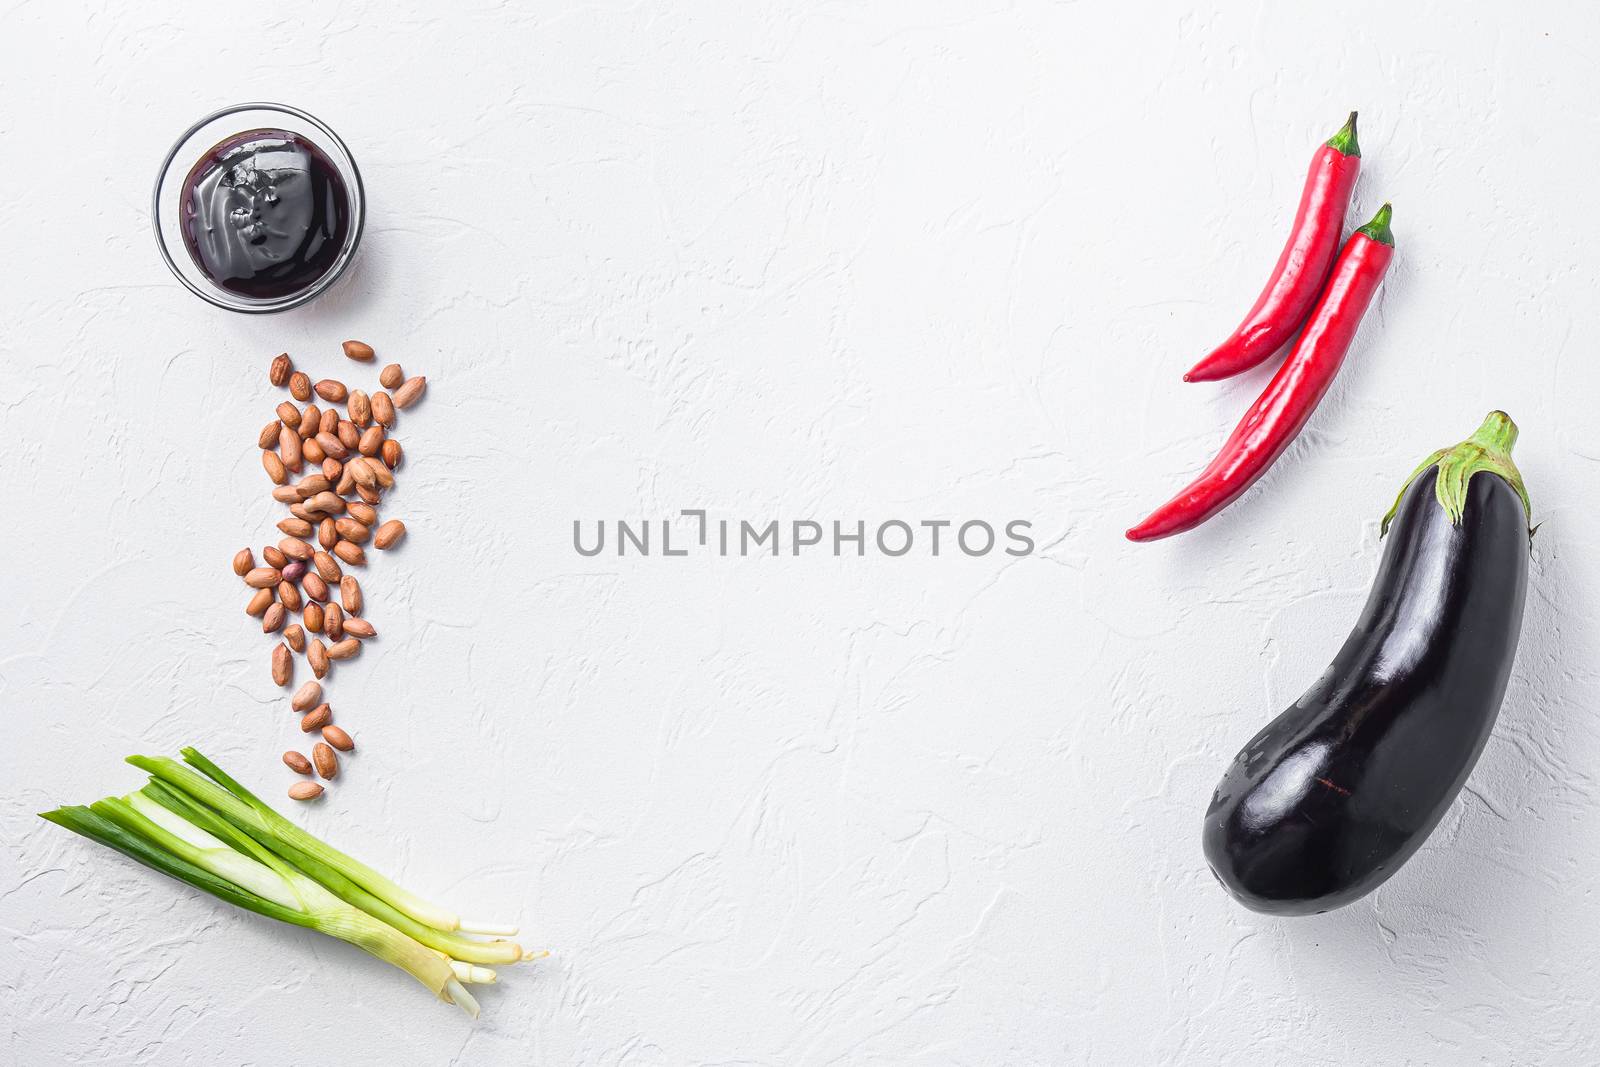 Ripe aubergine ingredients, for cooking or grill chili pepper, eggplant, sauce, nuts on white background top view space for text concept frame